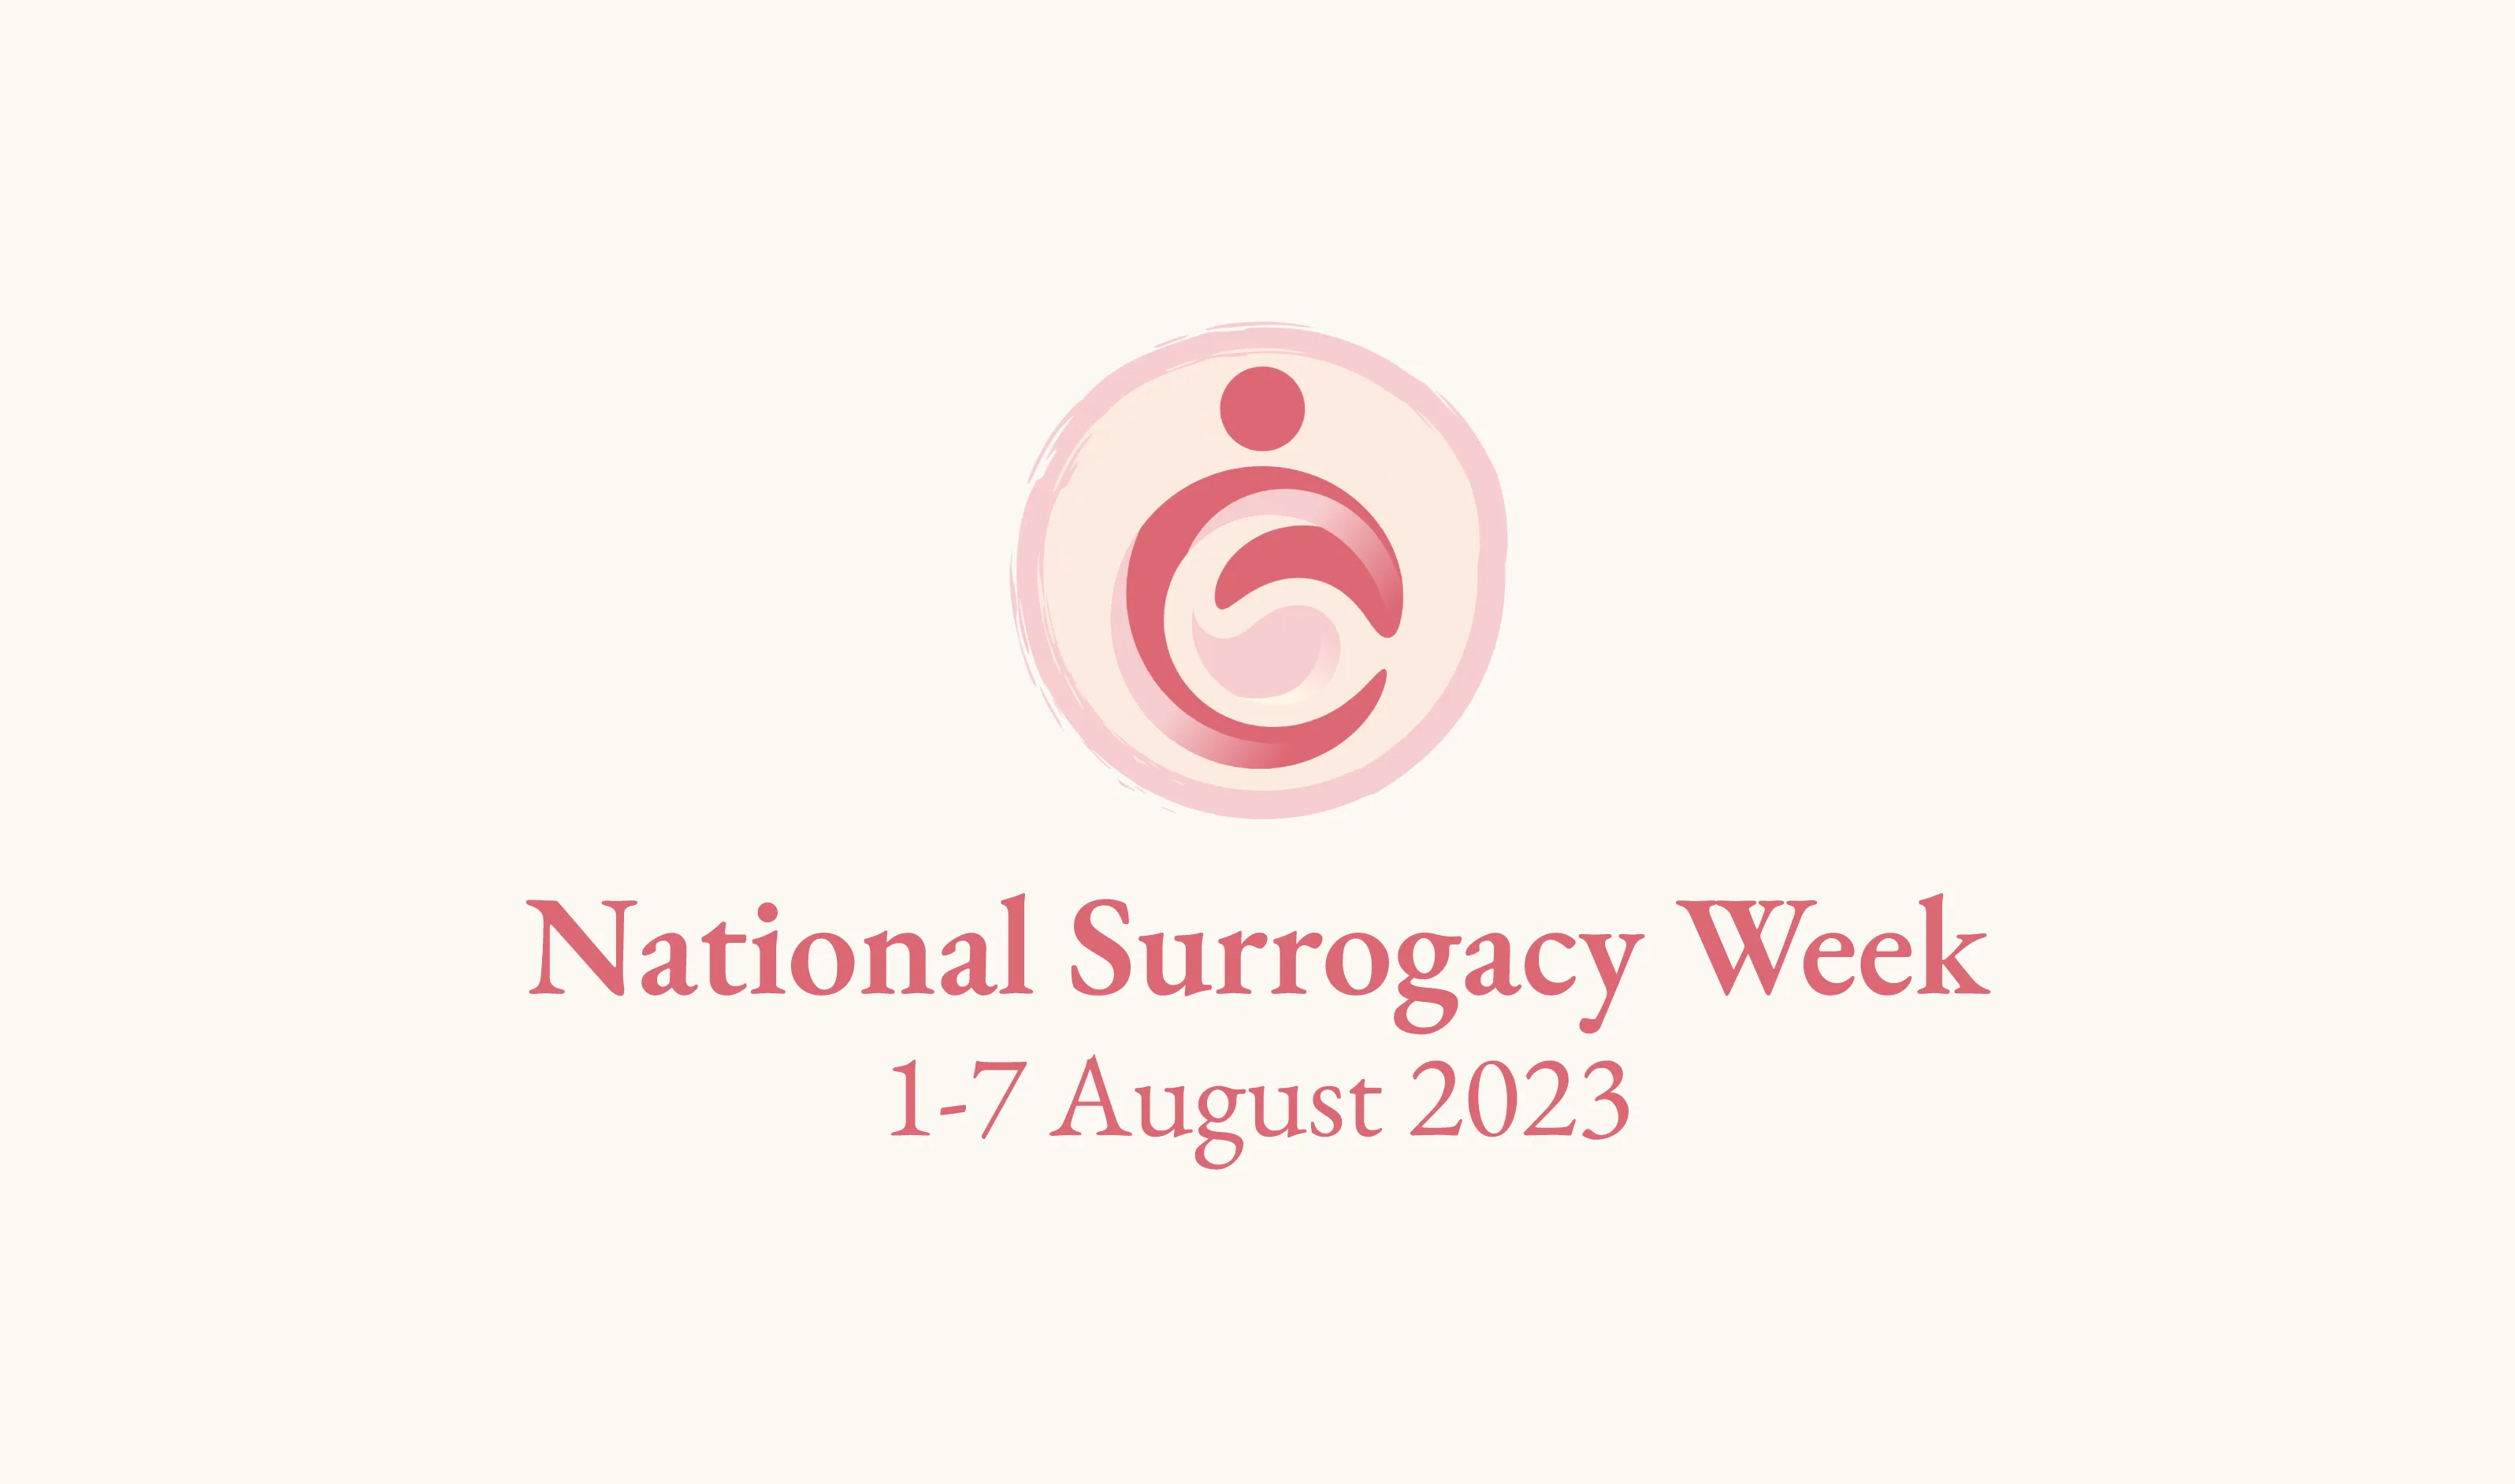 Edward Cooke Family Law supports National Surrogacy Week